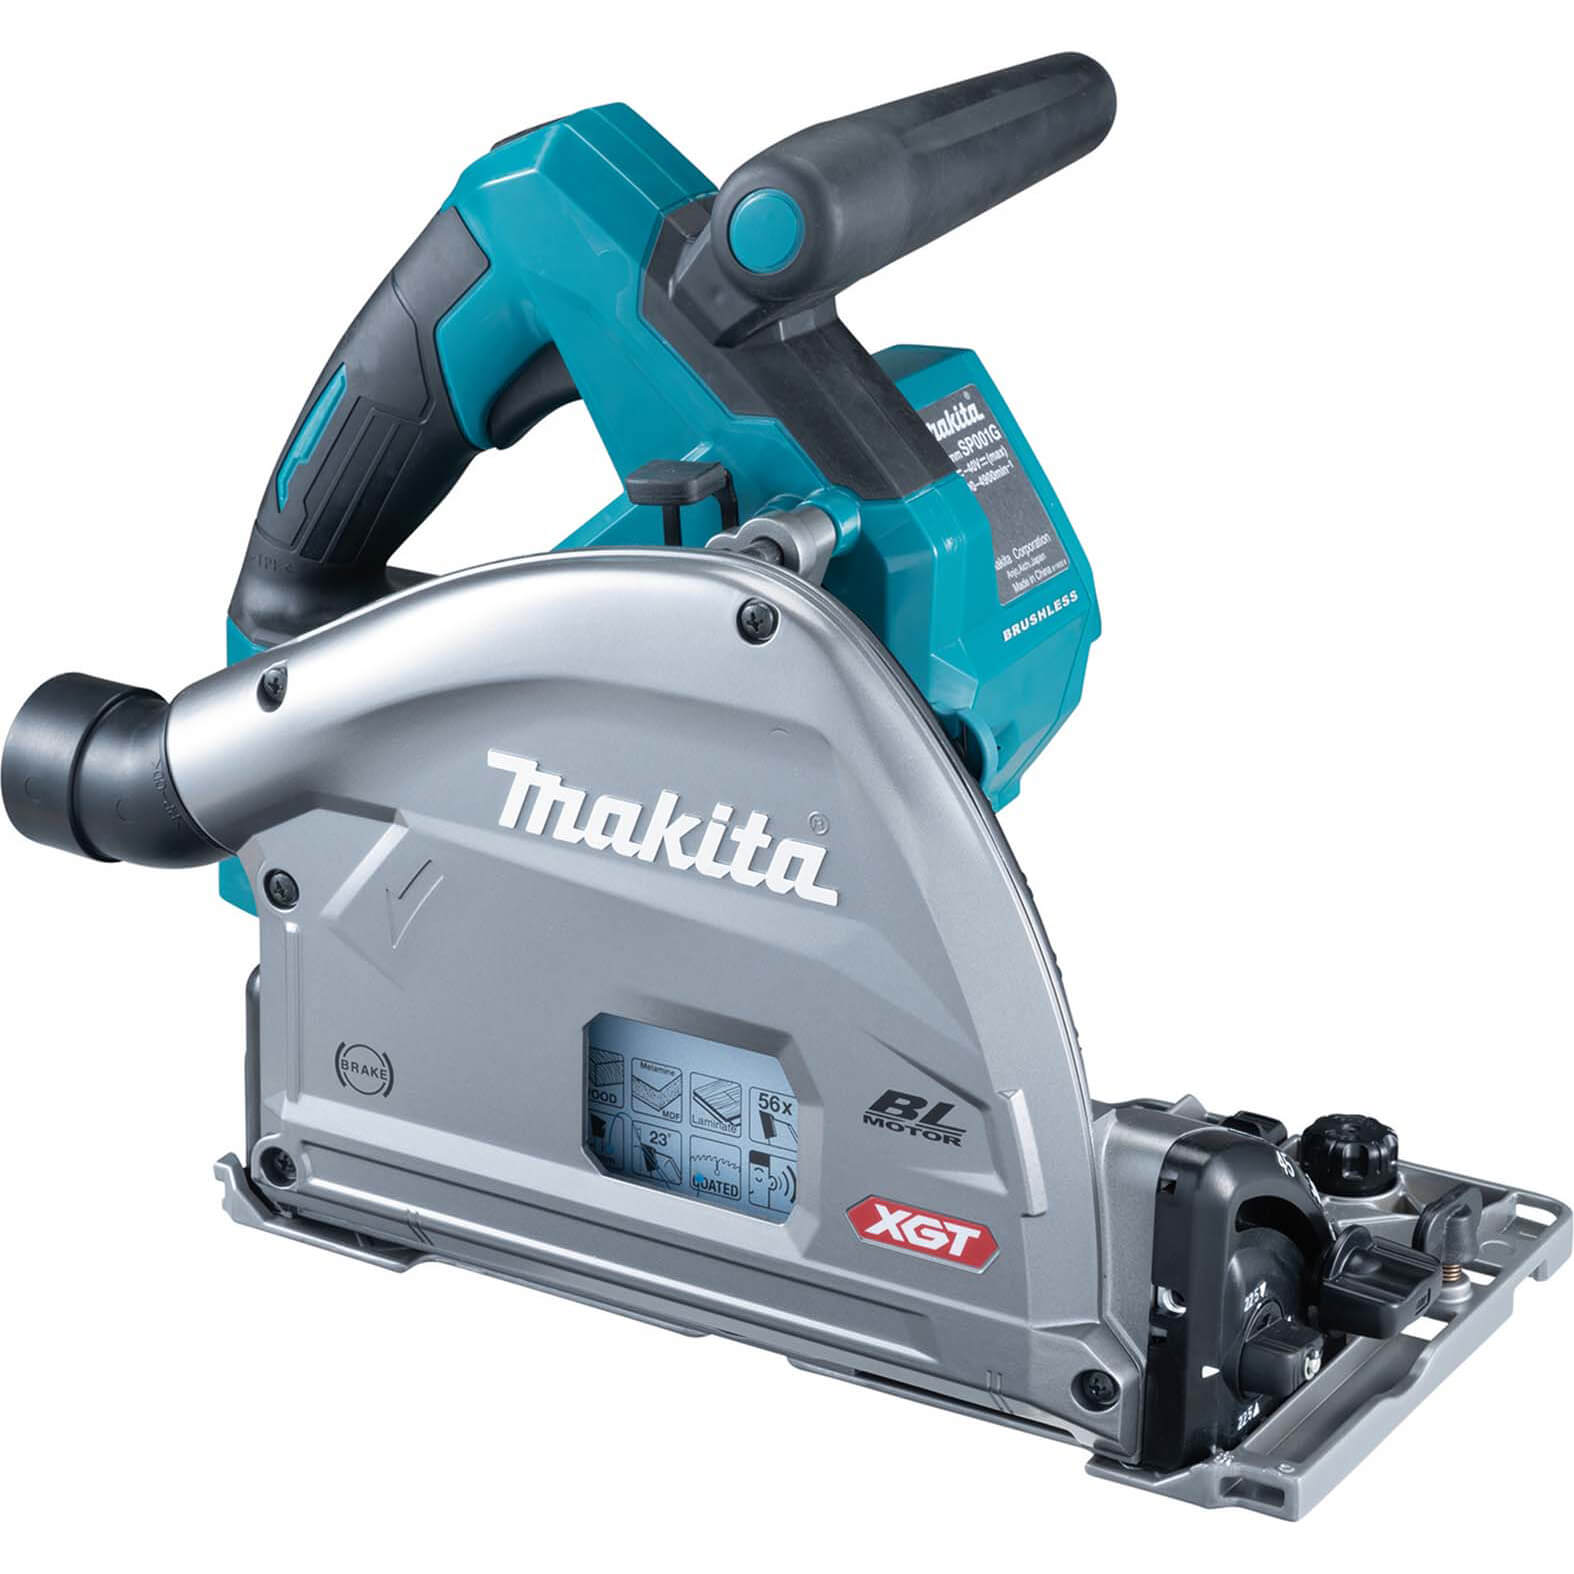 Makita SP001G 40v Max XGT Cordless Brushless Plunge Saw 165mm No Batteries No Charger No Case